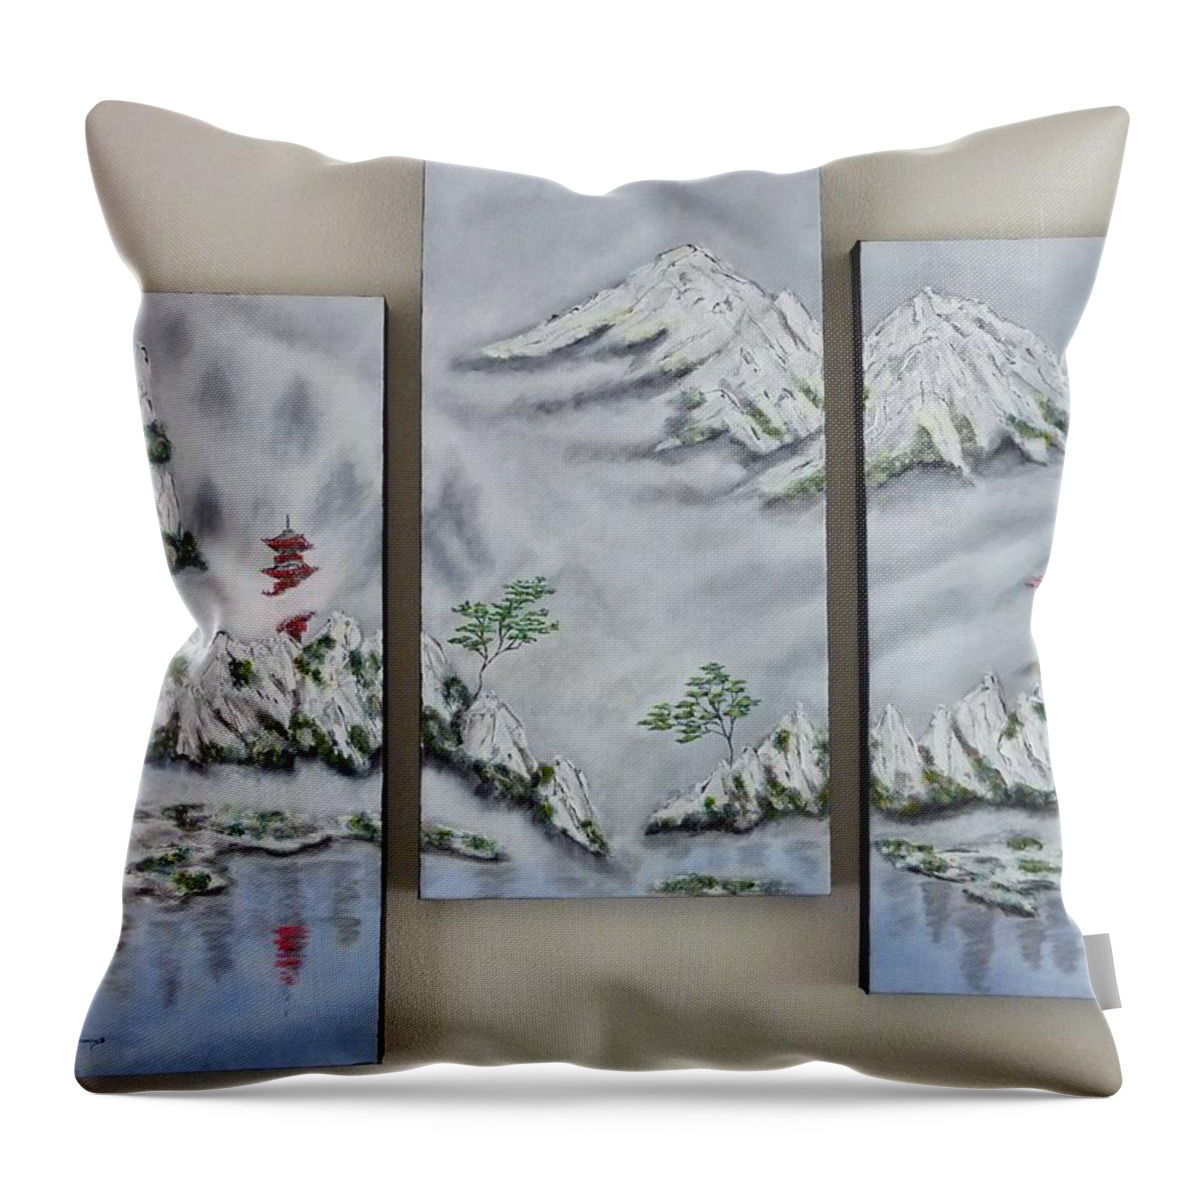 Morning Mist Throw Pillow featuring the painting Morning Mist Triptych by Amelie Simmons